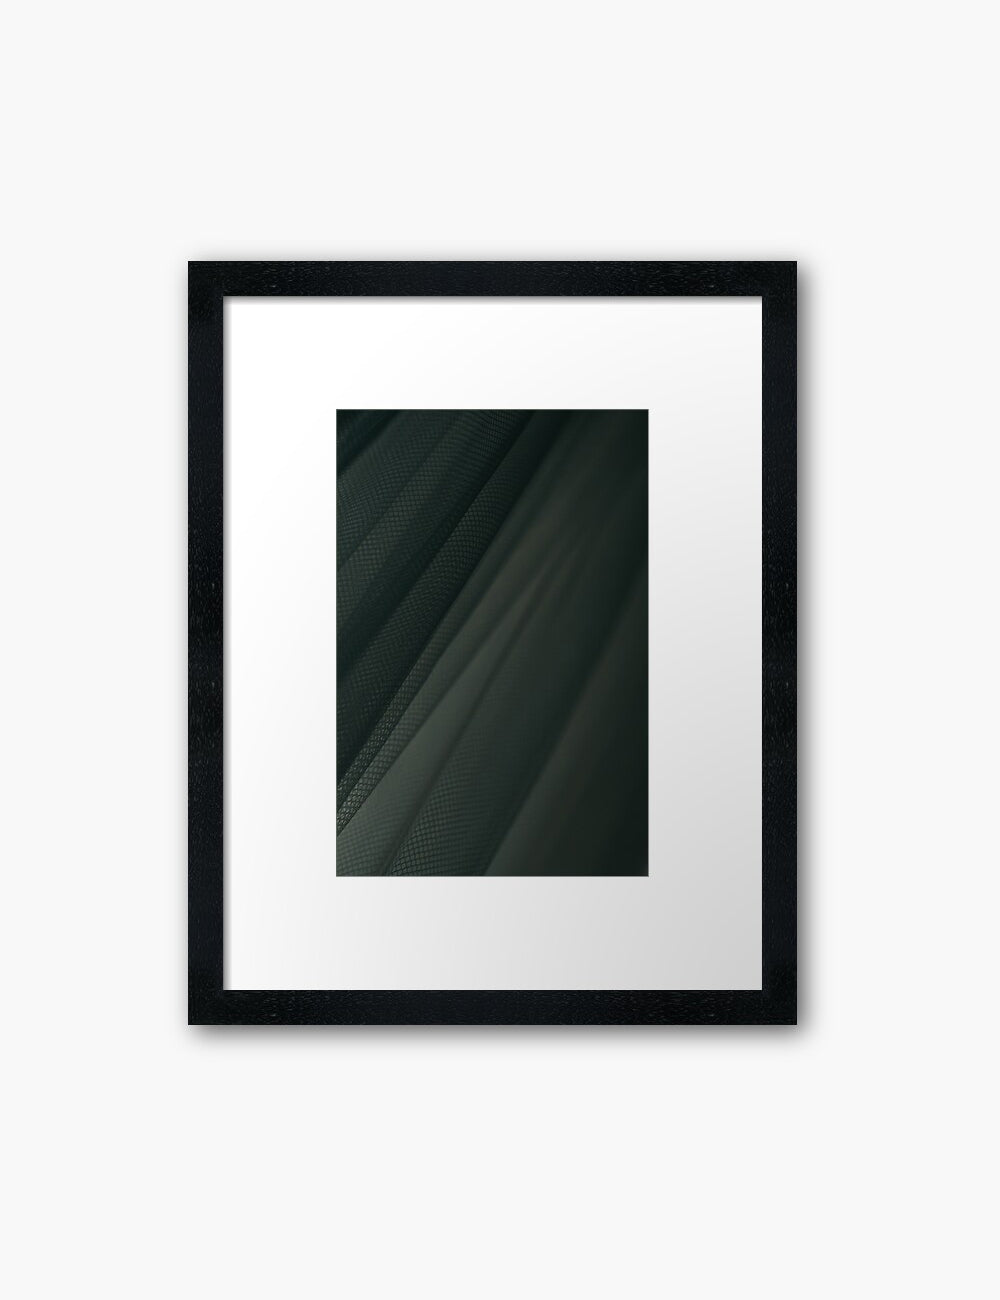 Abstract minimalist photography 2.2 Green aesthetic. Printable wall art photography. PAPER MOON Art & Design